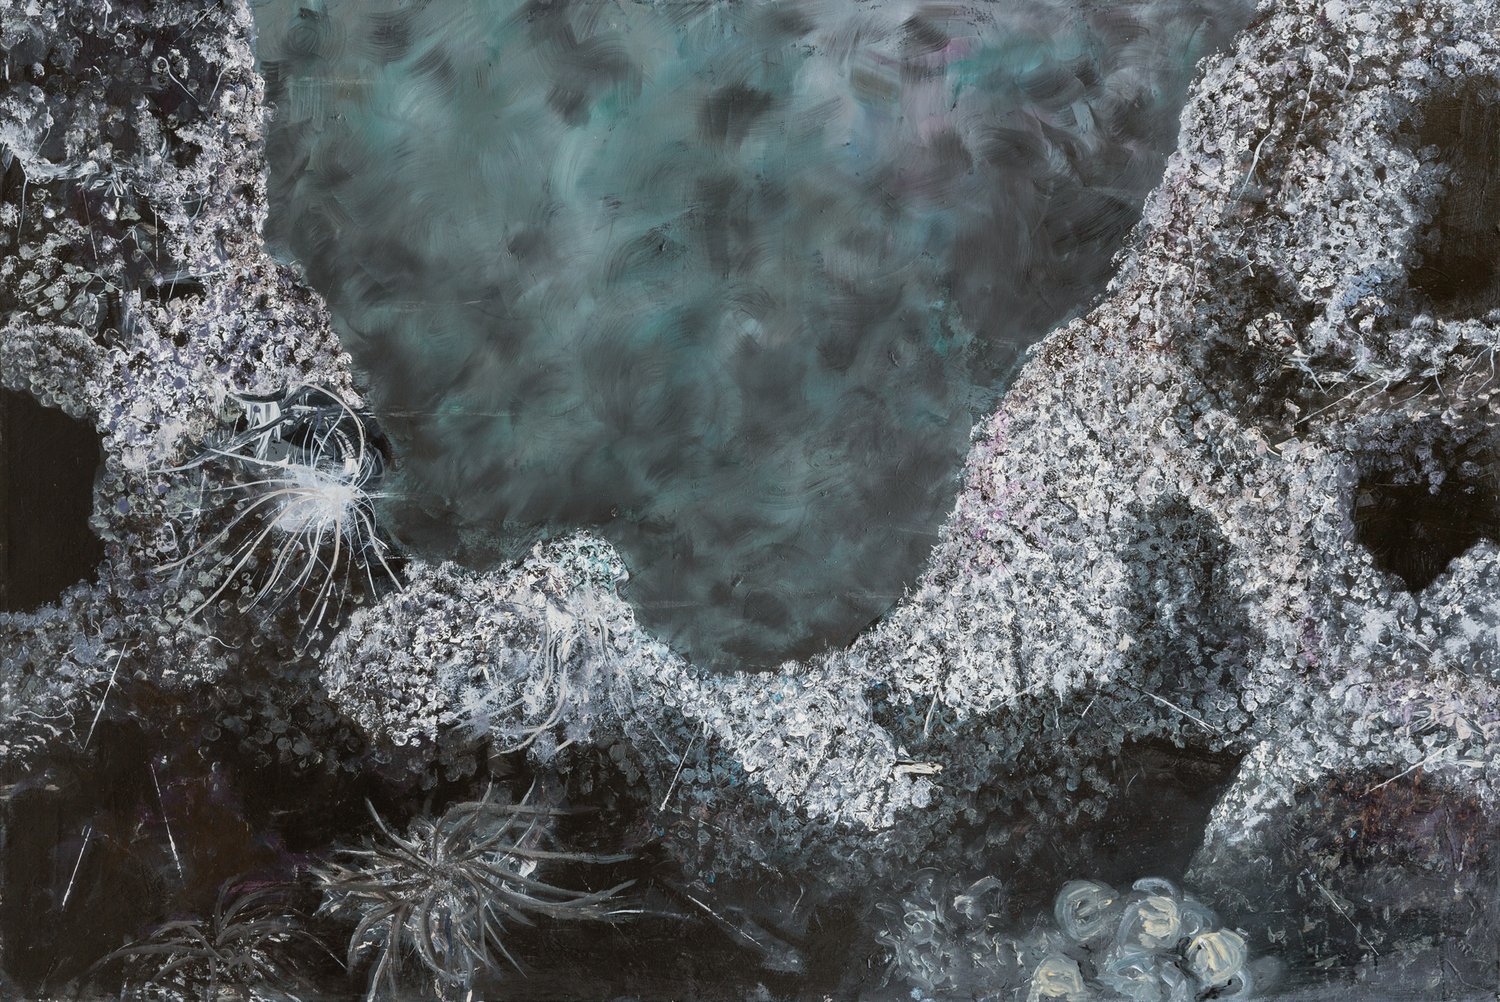  Great Barrier Reef, Oil on canvas, 100 x 150 cm 